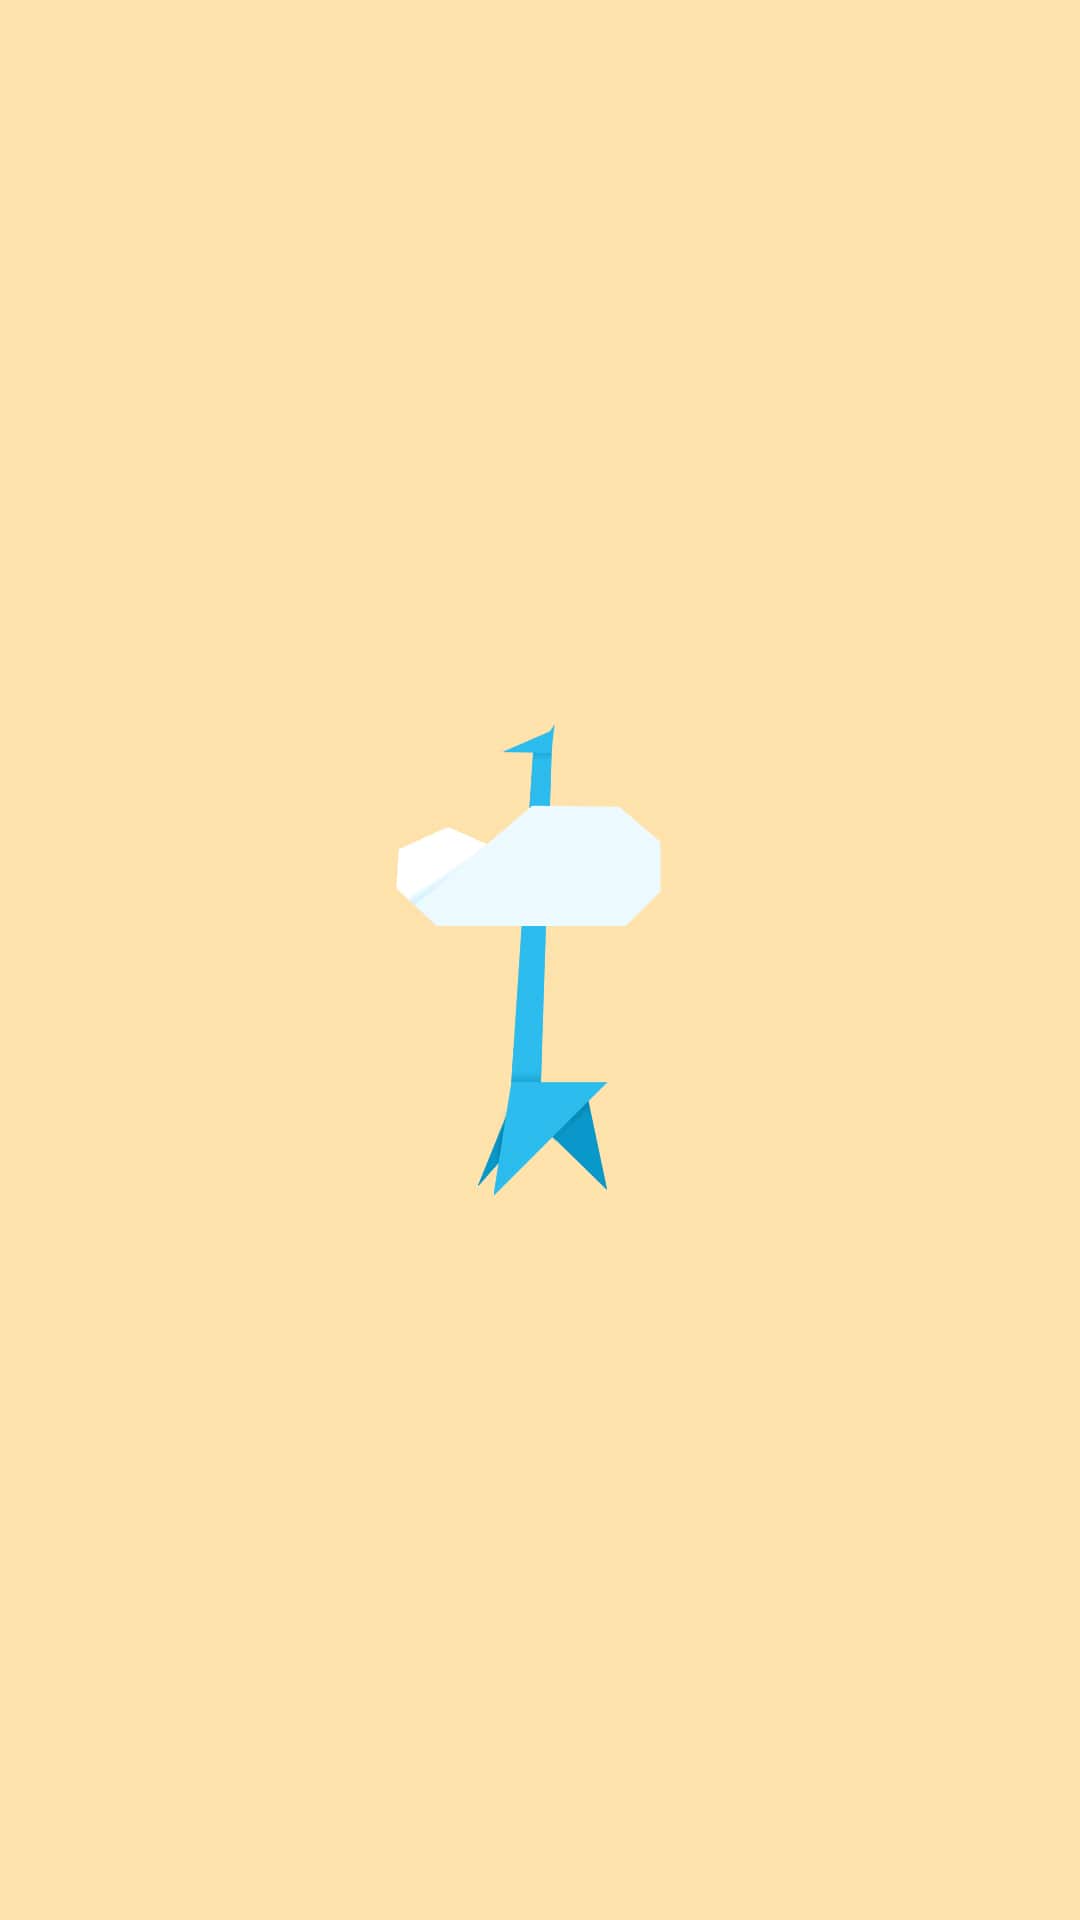 50 Minimalist Iphone Wallpapers Man Of Many